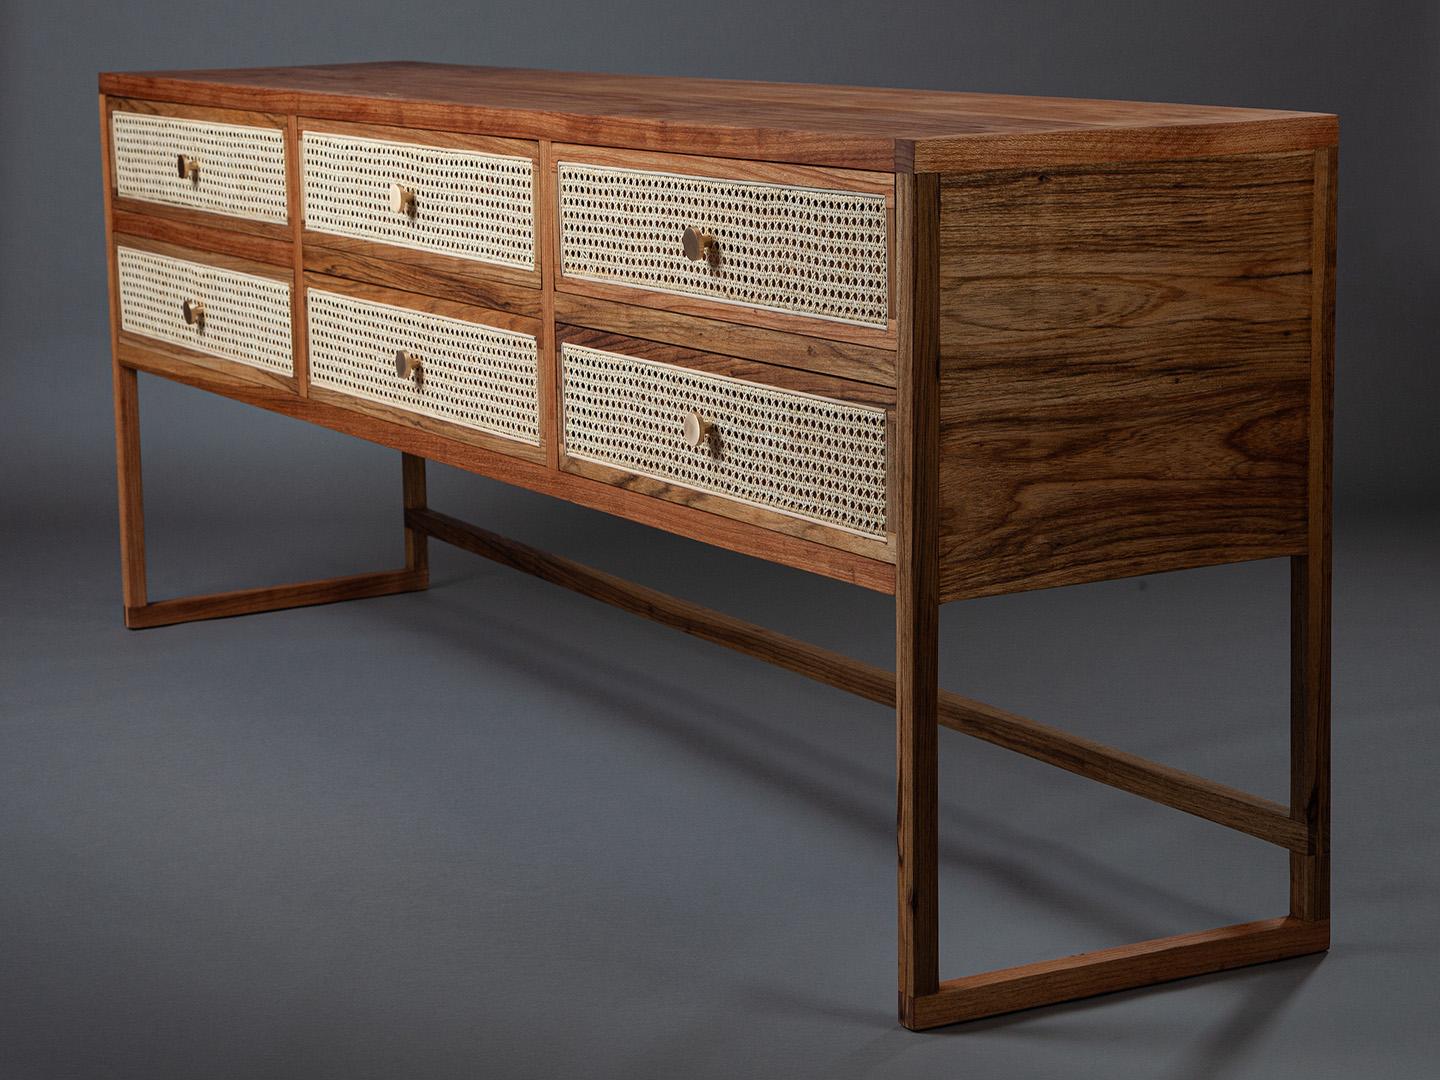 Modern The Square Dresser. Brazilian Solid Wood and Natural Straw For Sale